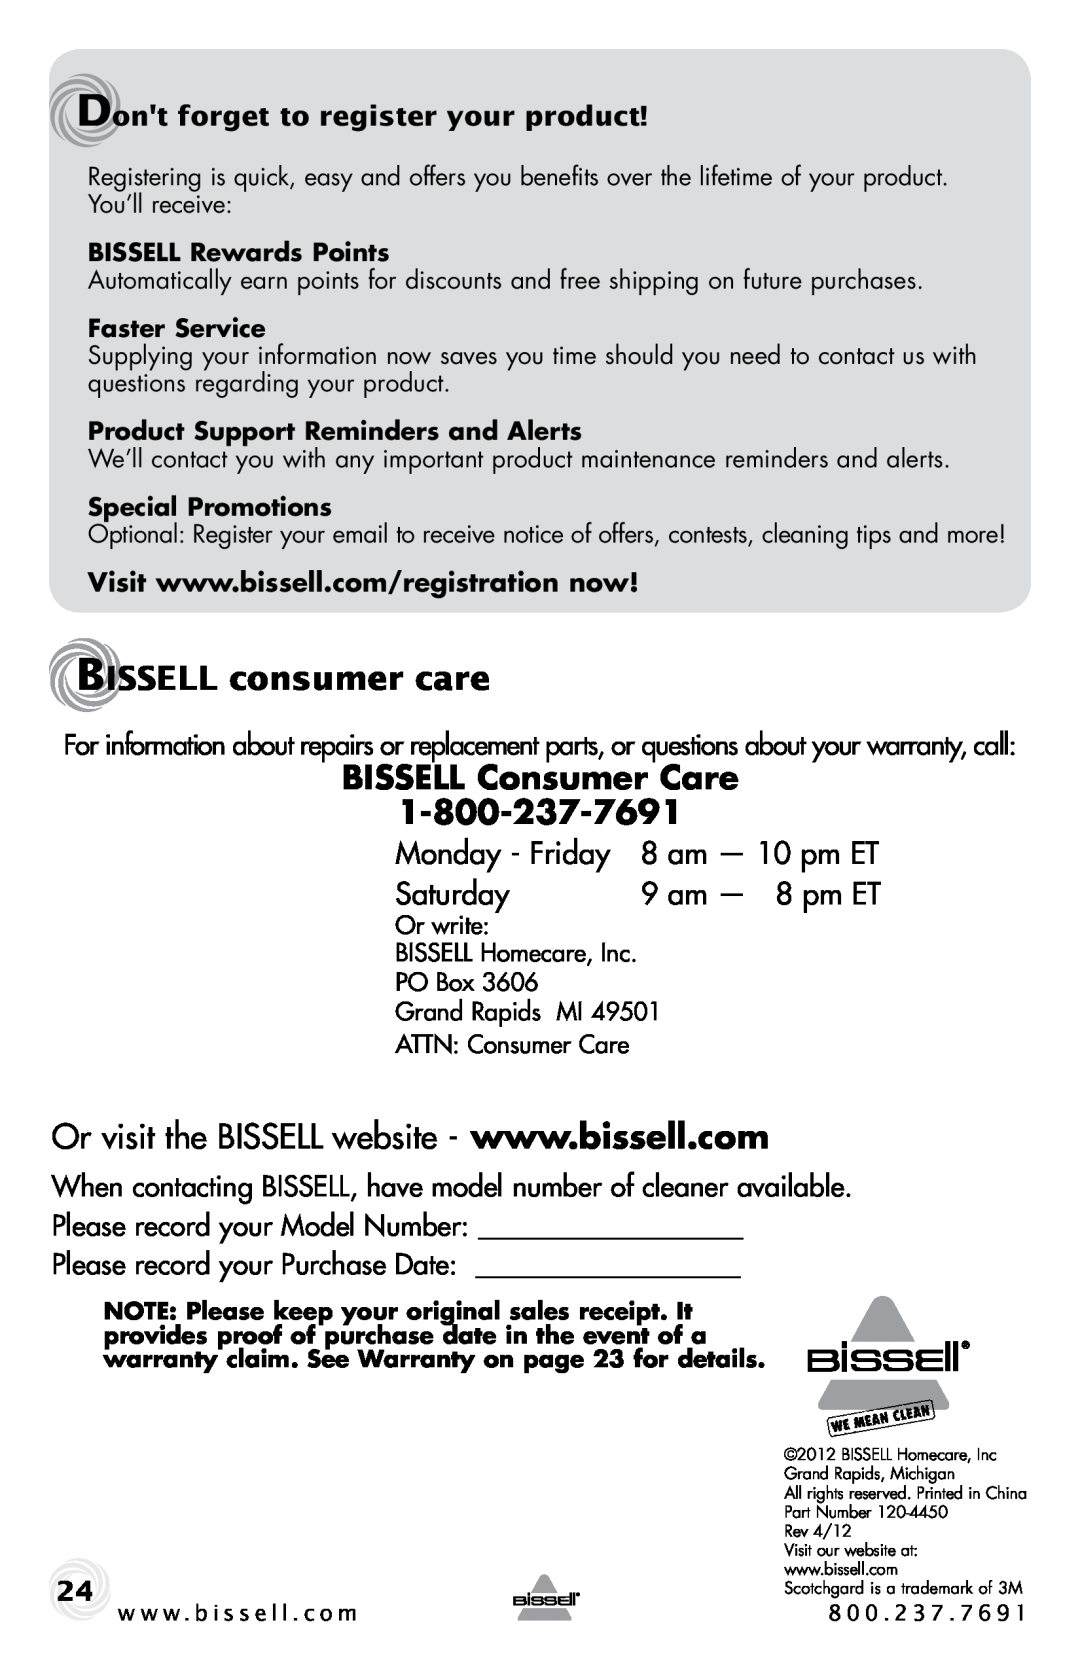 Bissell 9500-p warranty BISSELL consumer care, BISSELL Consumer Care, Dont forget to register your product, Monday - Friday 